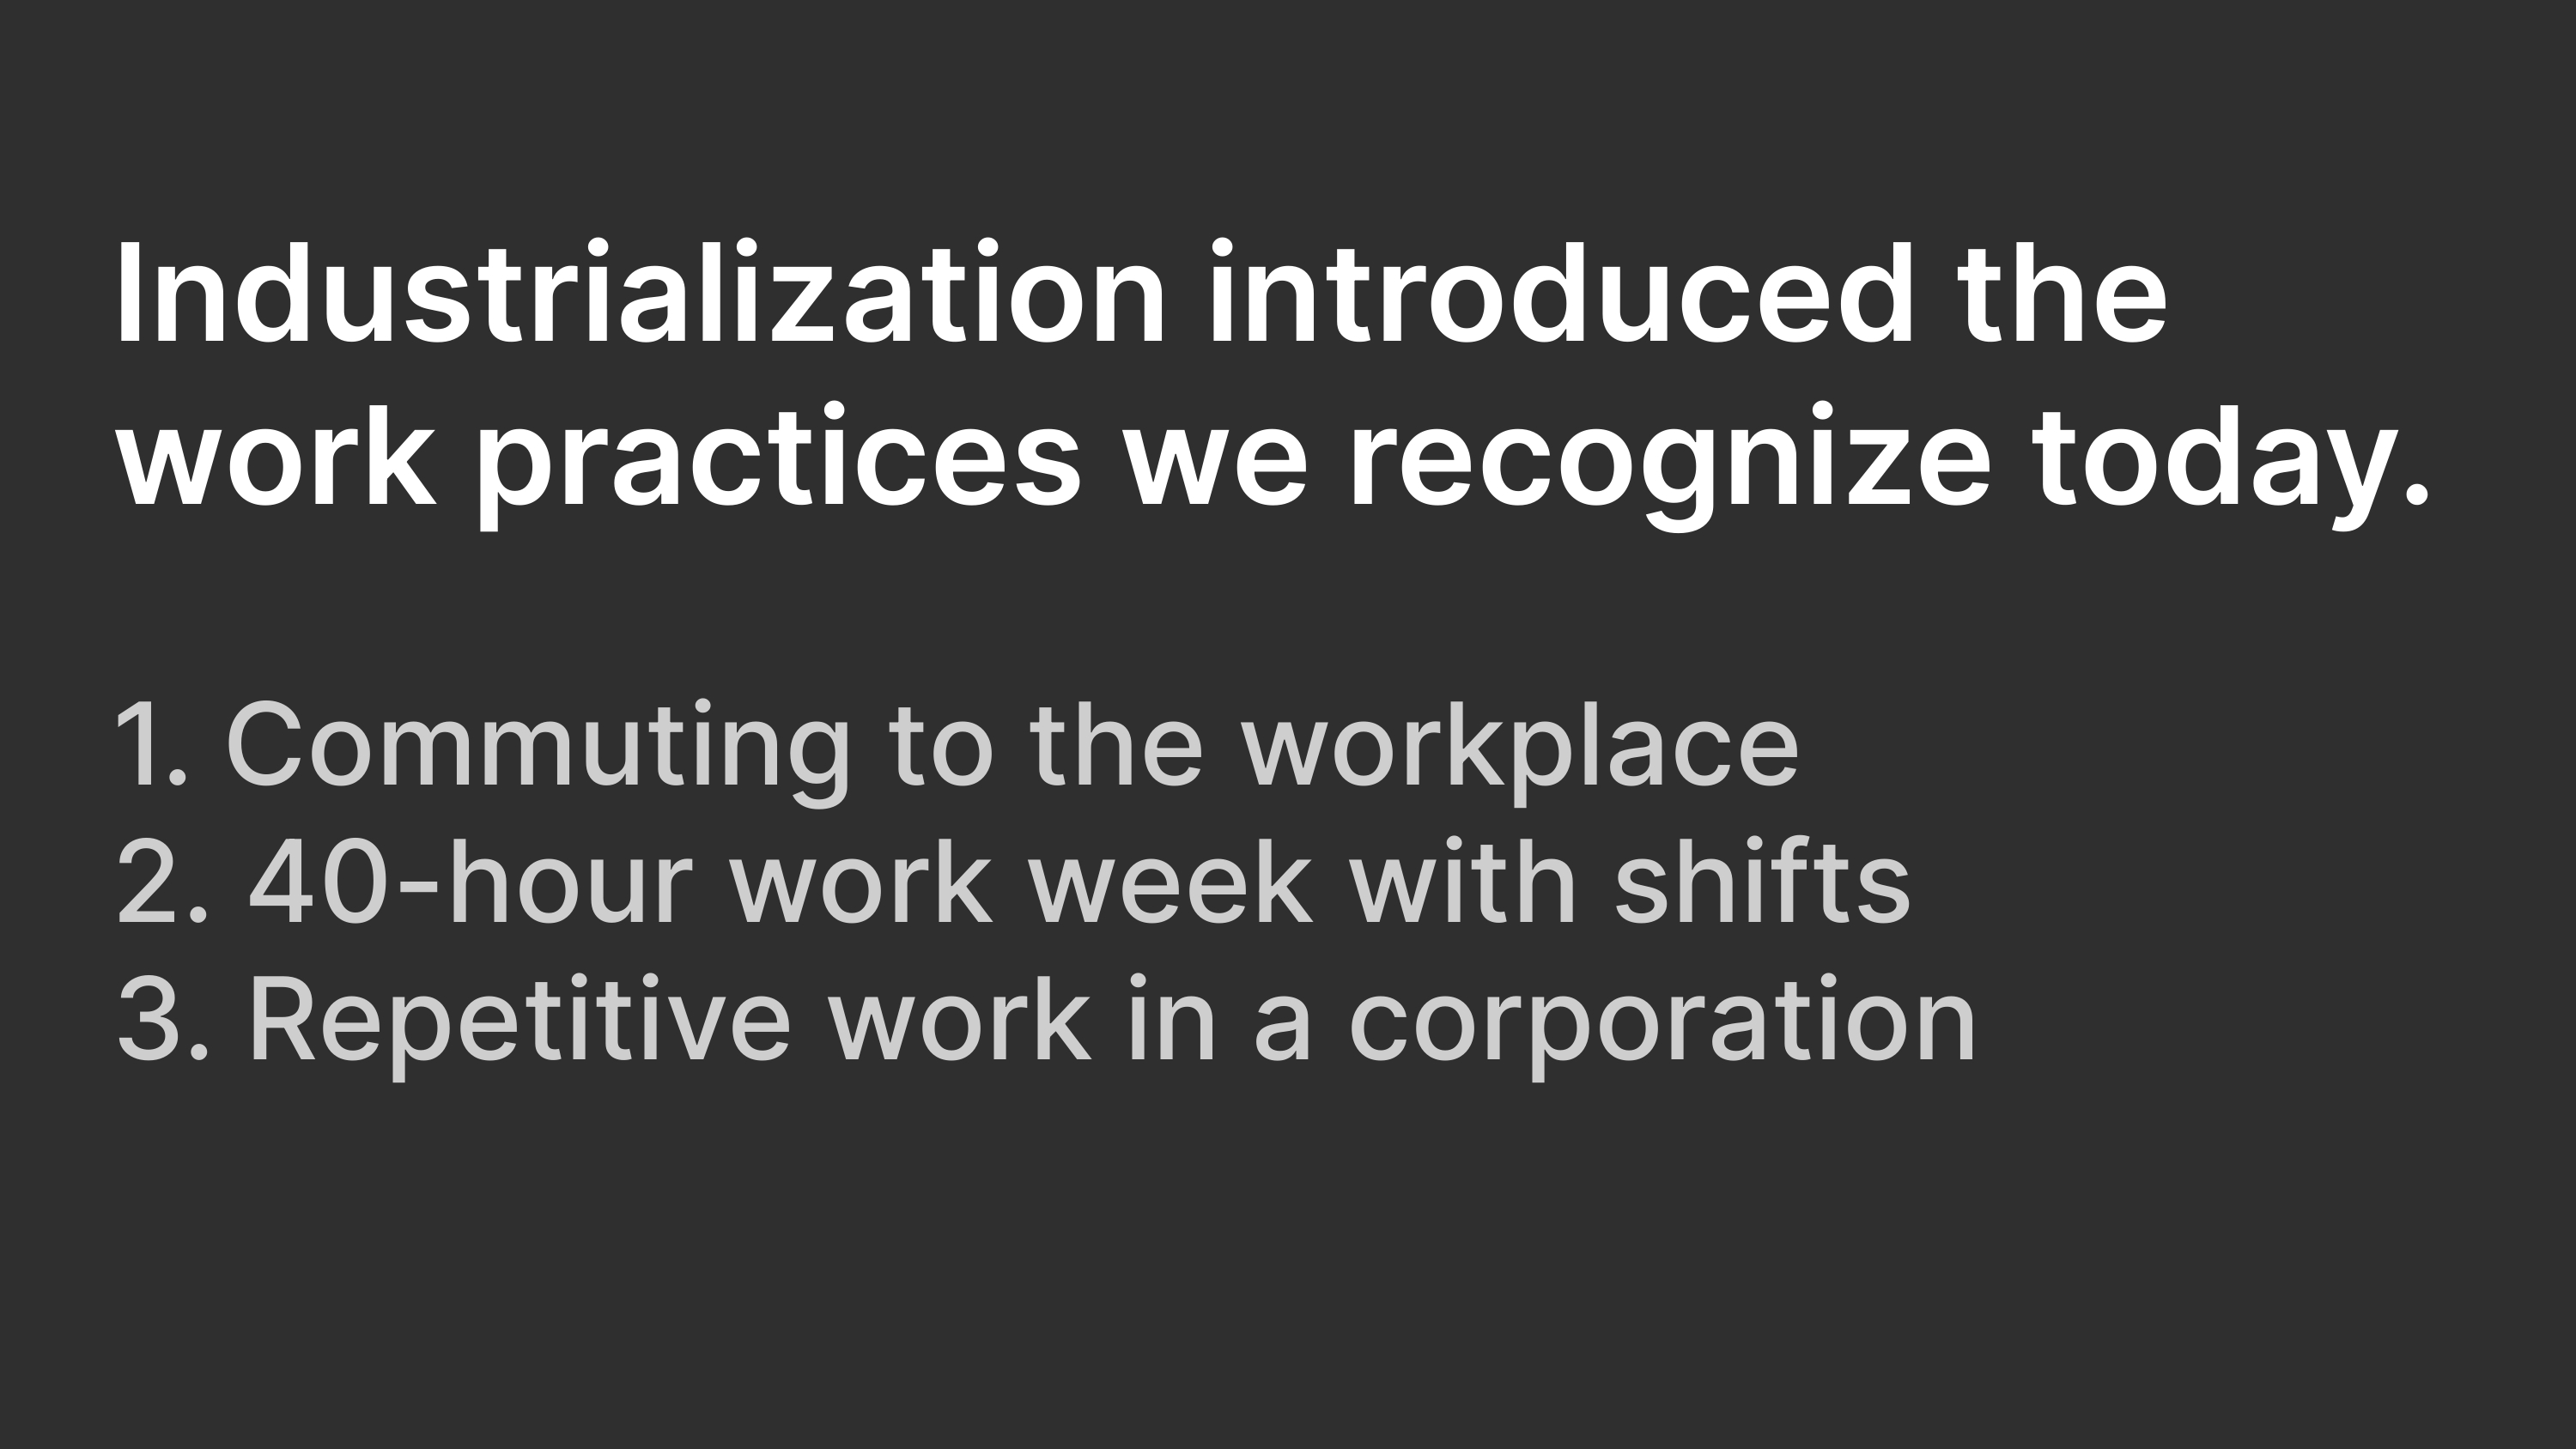 Industrialization introduced the work practices we recognize today: Commuting to the workplace; 40-hour work weeks with shifts; Repetitive work in a corporation